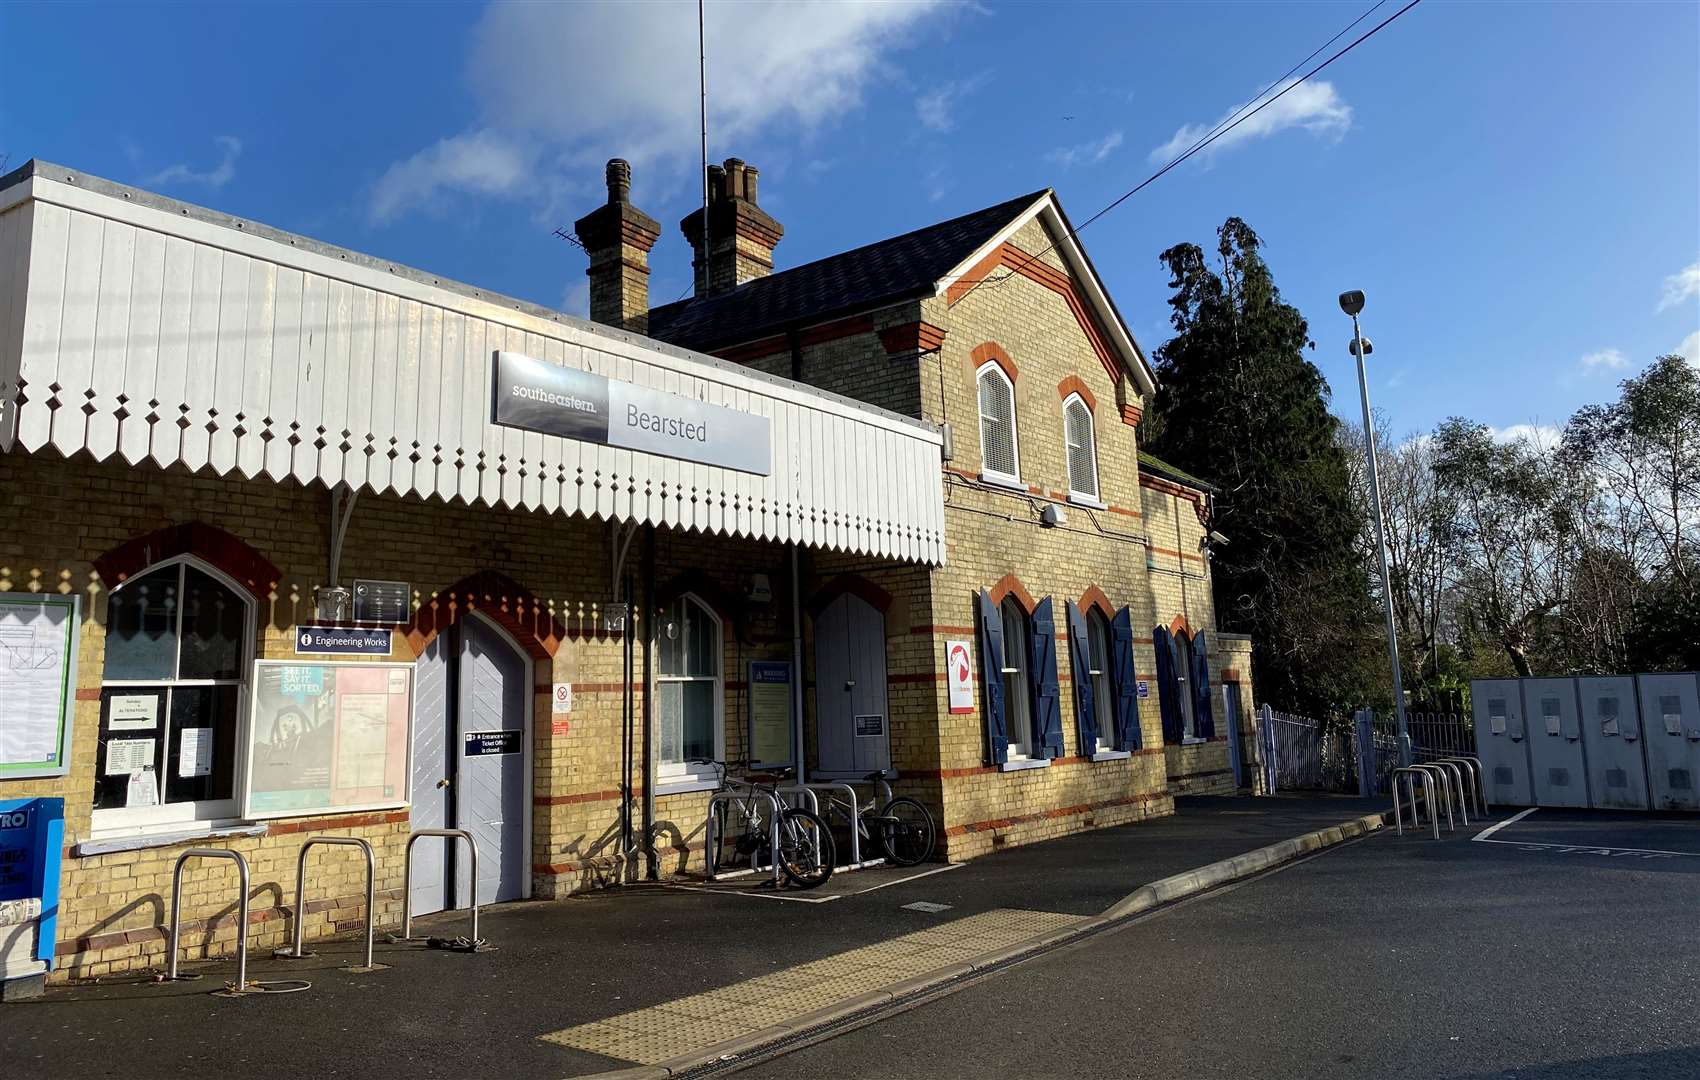 Bearsted Library is part of the village’s railway station on Ware Street